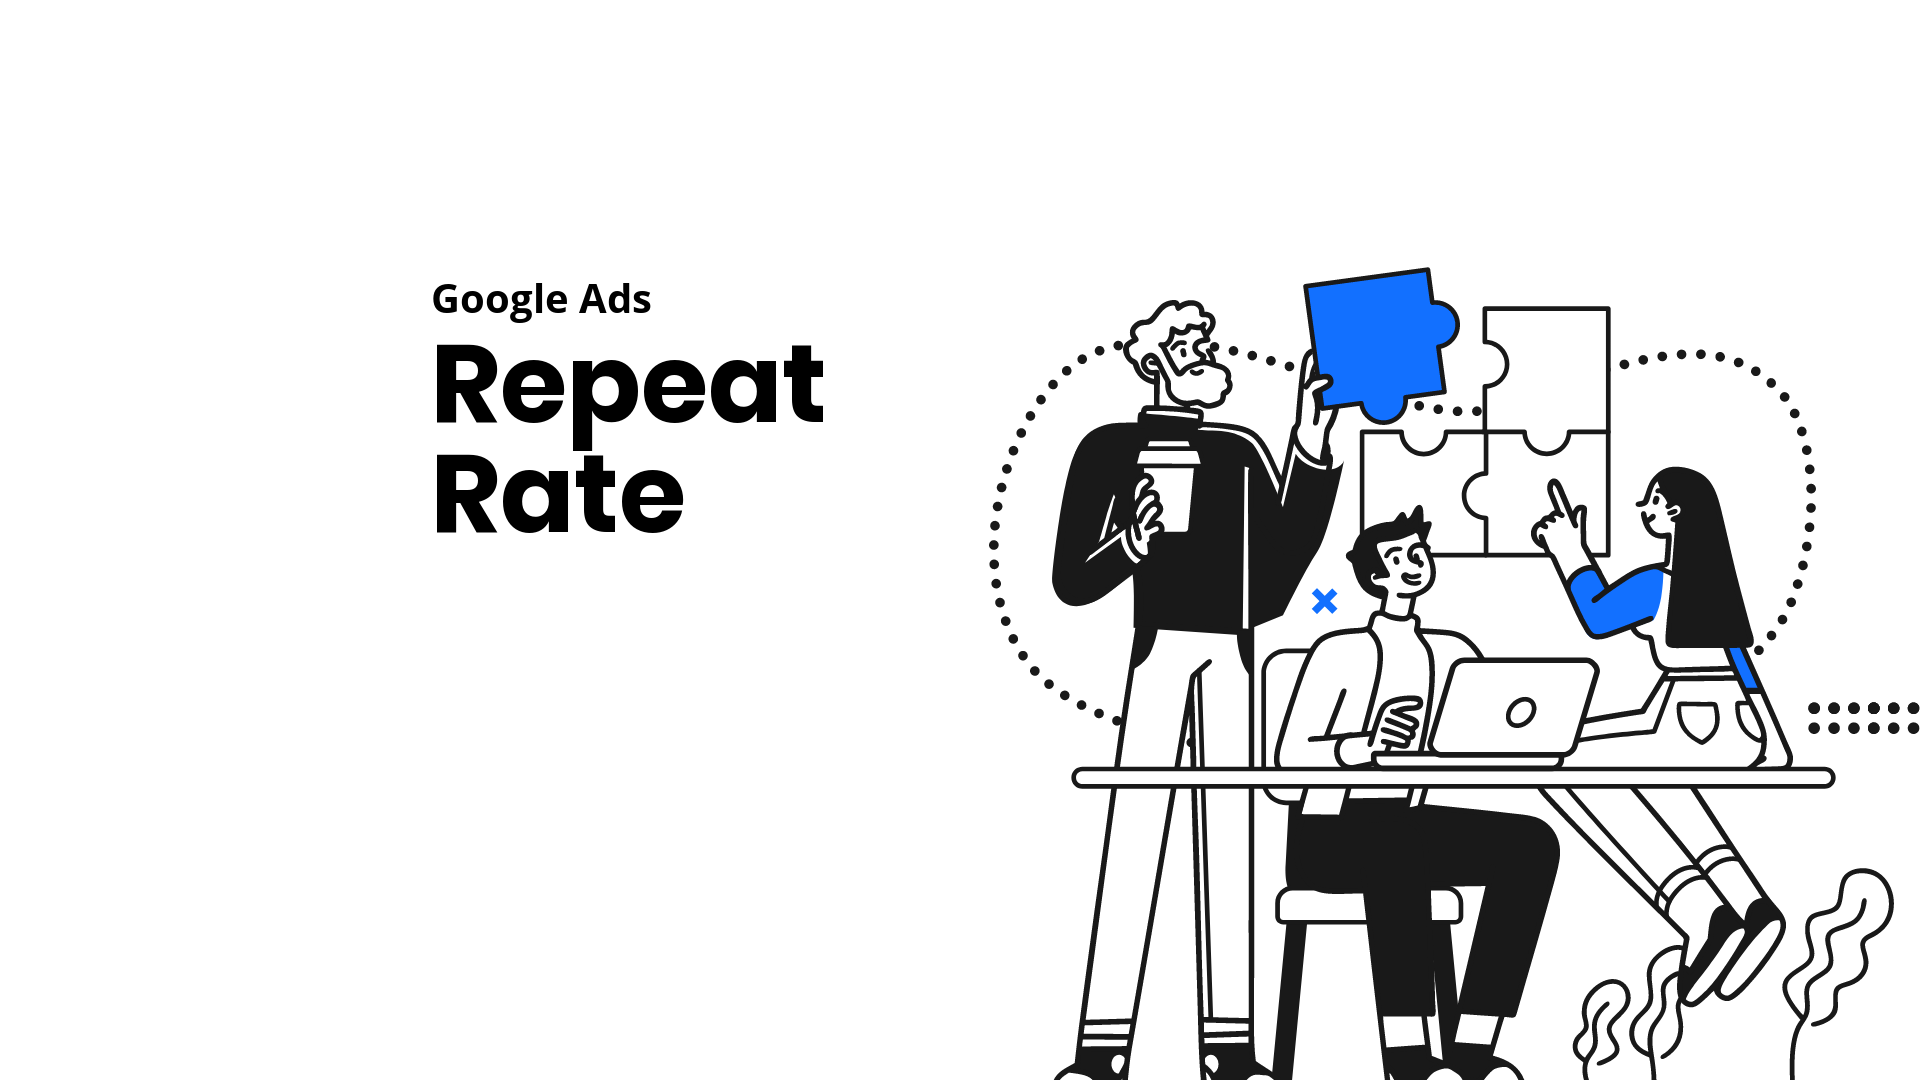 Google Ads Repeat Rate